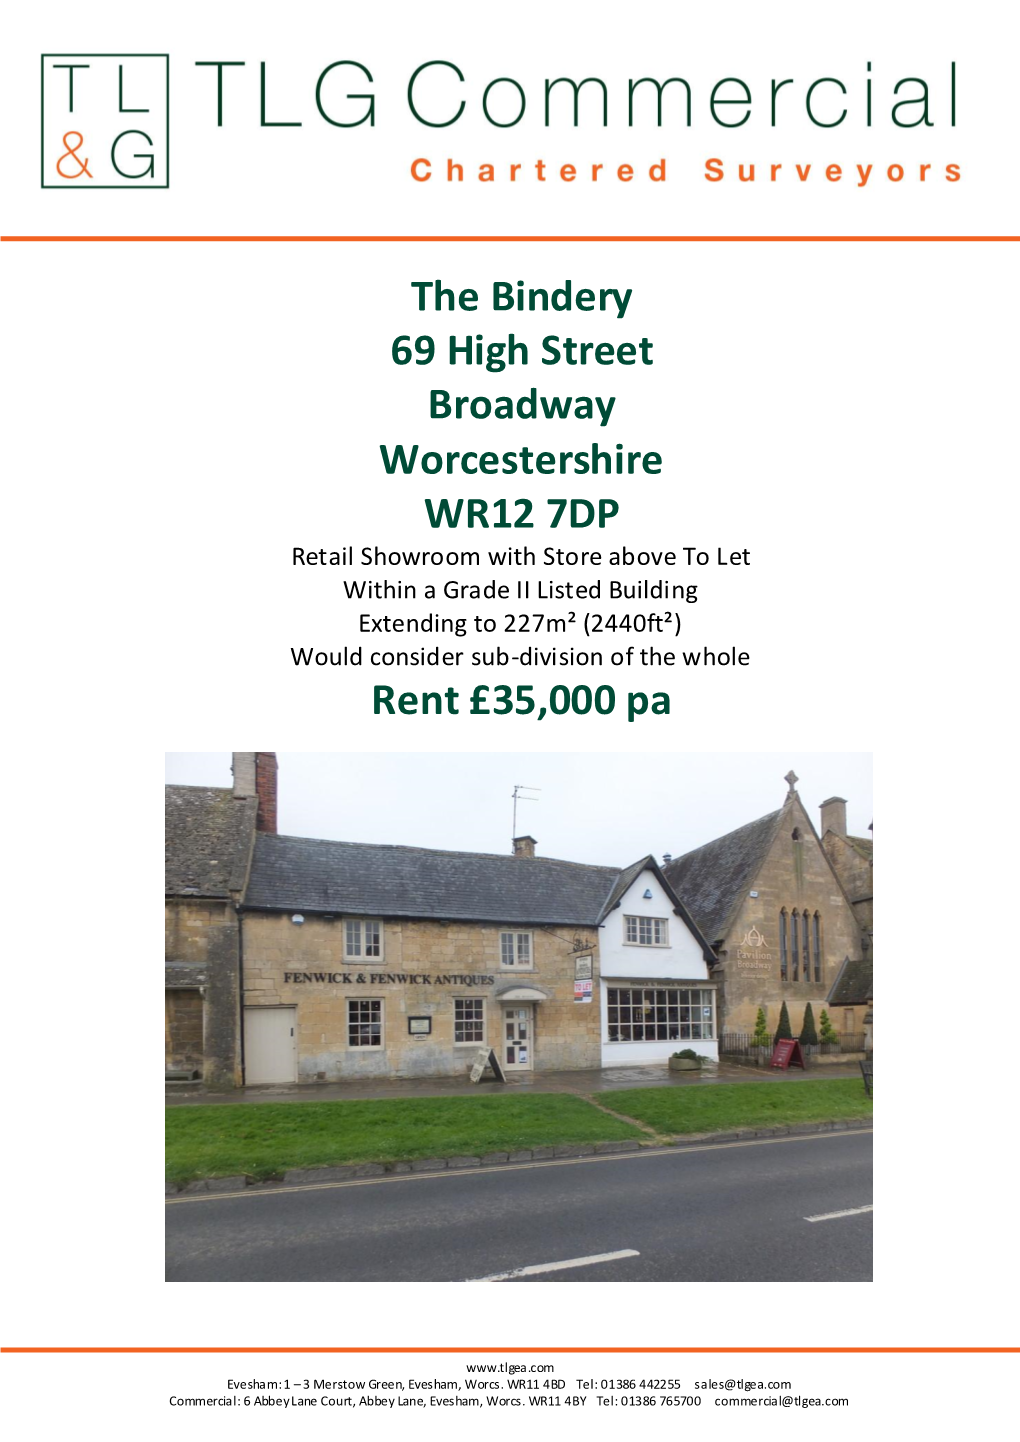 The Bindery 69 High Street Broadway Worcestershire WR12 7DP Rent £35,000 Pa